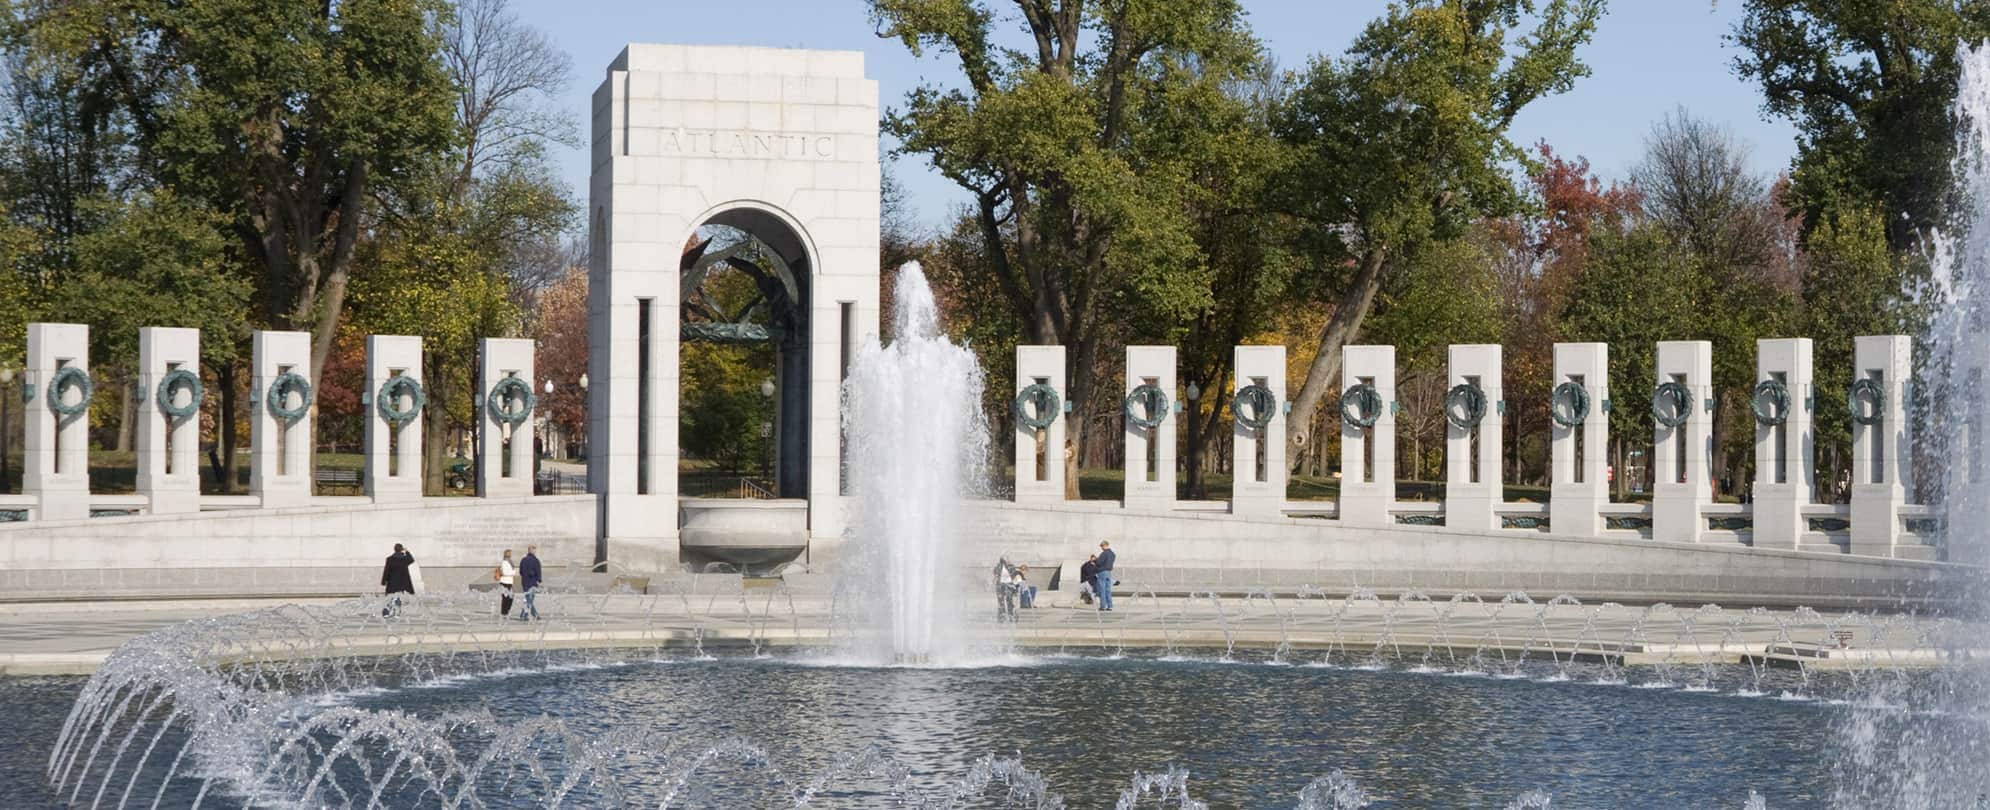 People walking around the fountain at the World War II memorial in the National Mall in Washington, D.C.